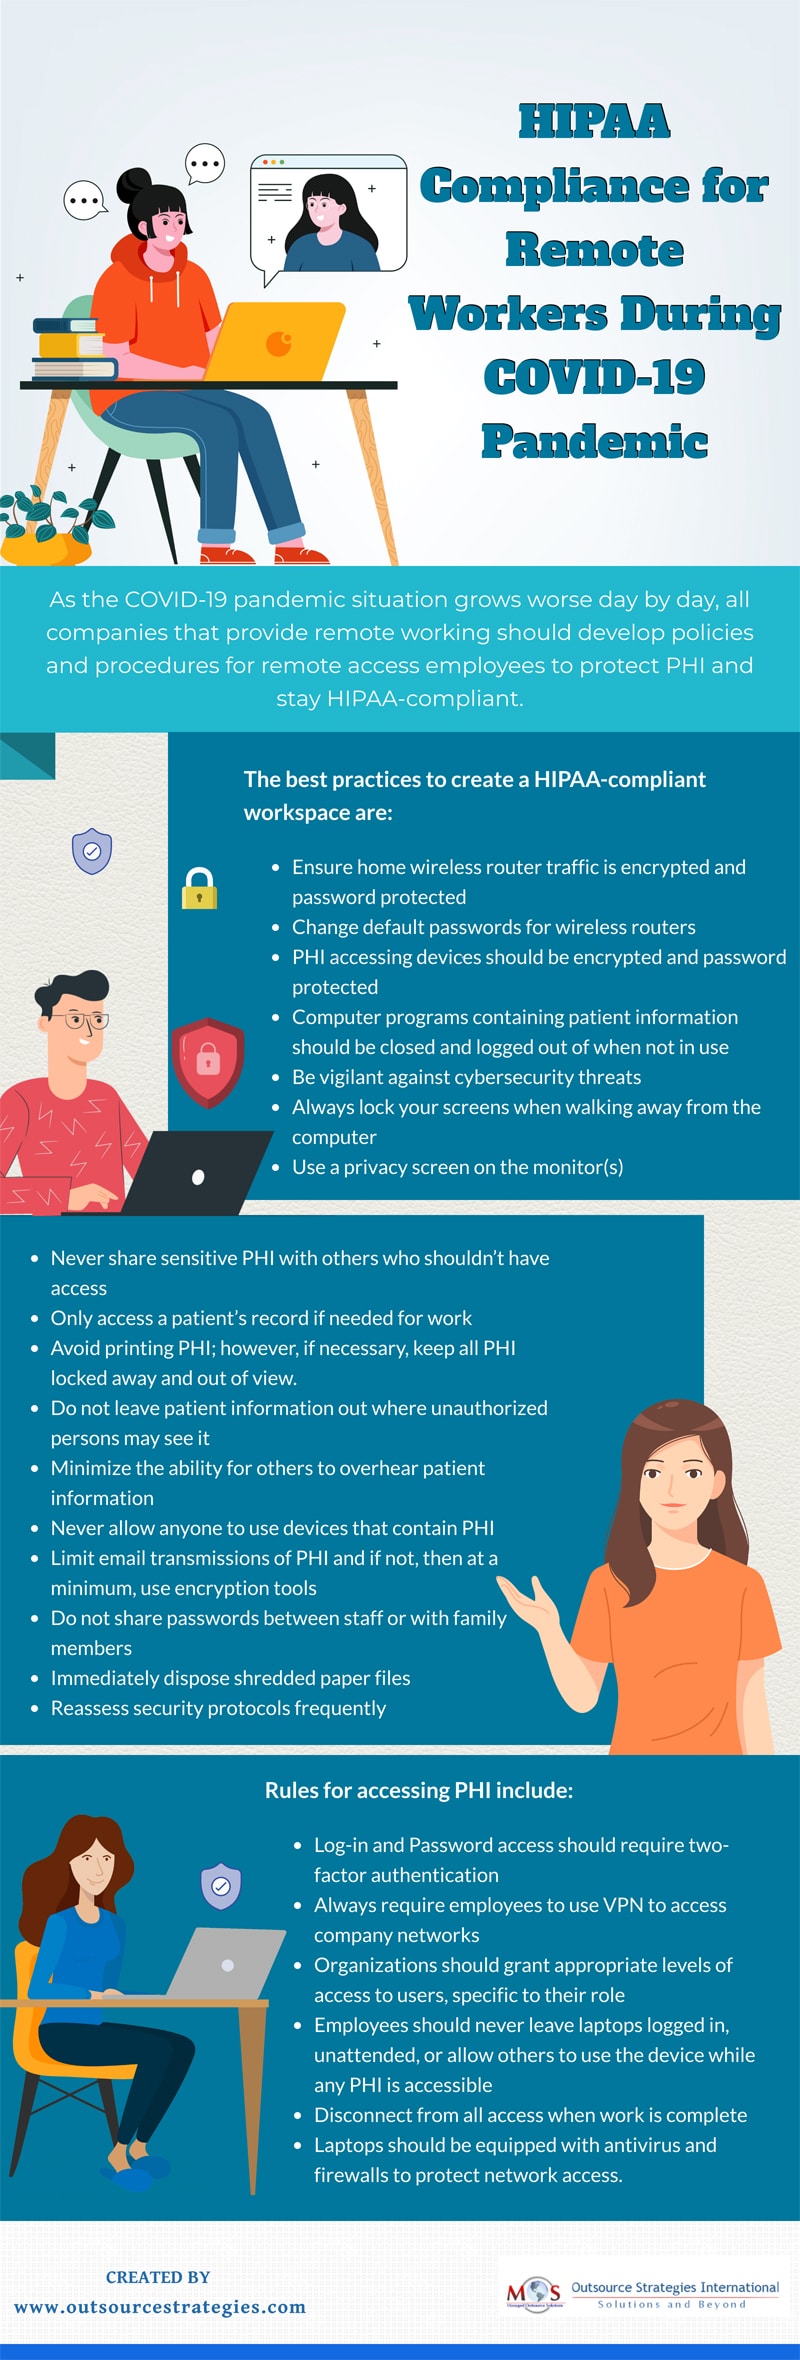 HIPAA Compliance for Remote Workers During COVID-19